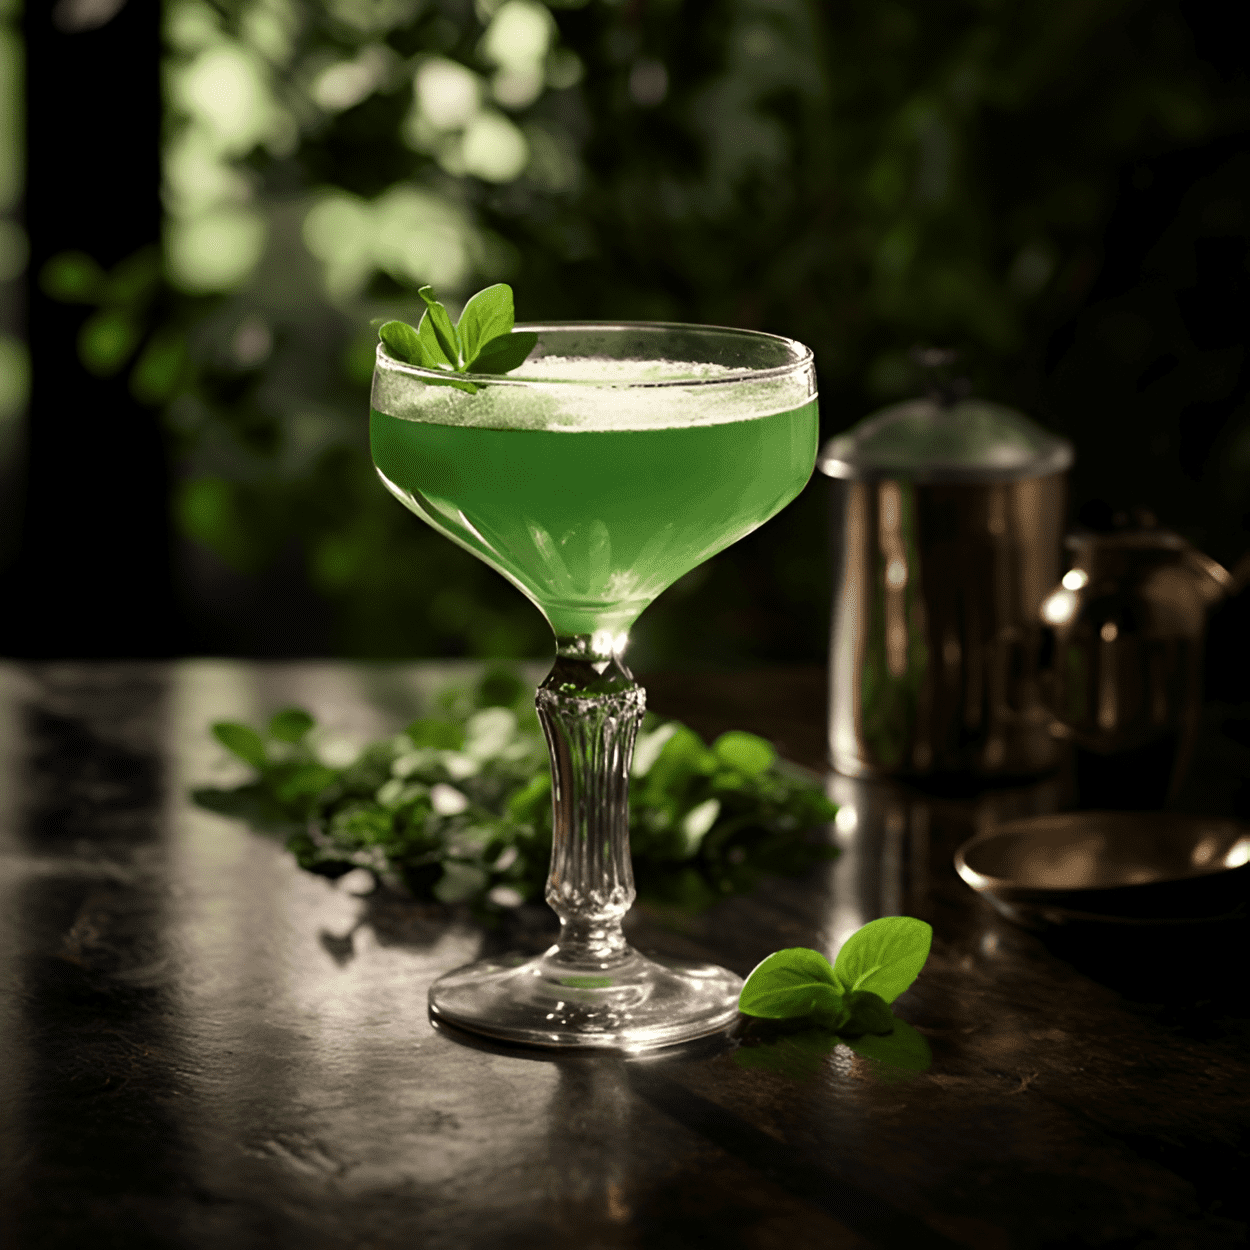 Emerald Isle Cocktail Recipe - The Emerald Isle cocktail is a refreshing and well-balanced drink with a slightly sweet, herbal, and citrusy flavor profile. The gin provides a strong, juniper-forward base, while the green crème de menthe adds a cooling, minty sweetness. The bitters and lemon juice bring a touch of bitterness and acidity to round out the taste.